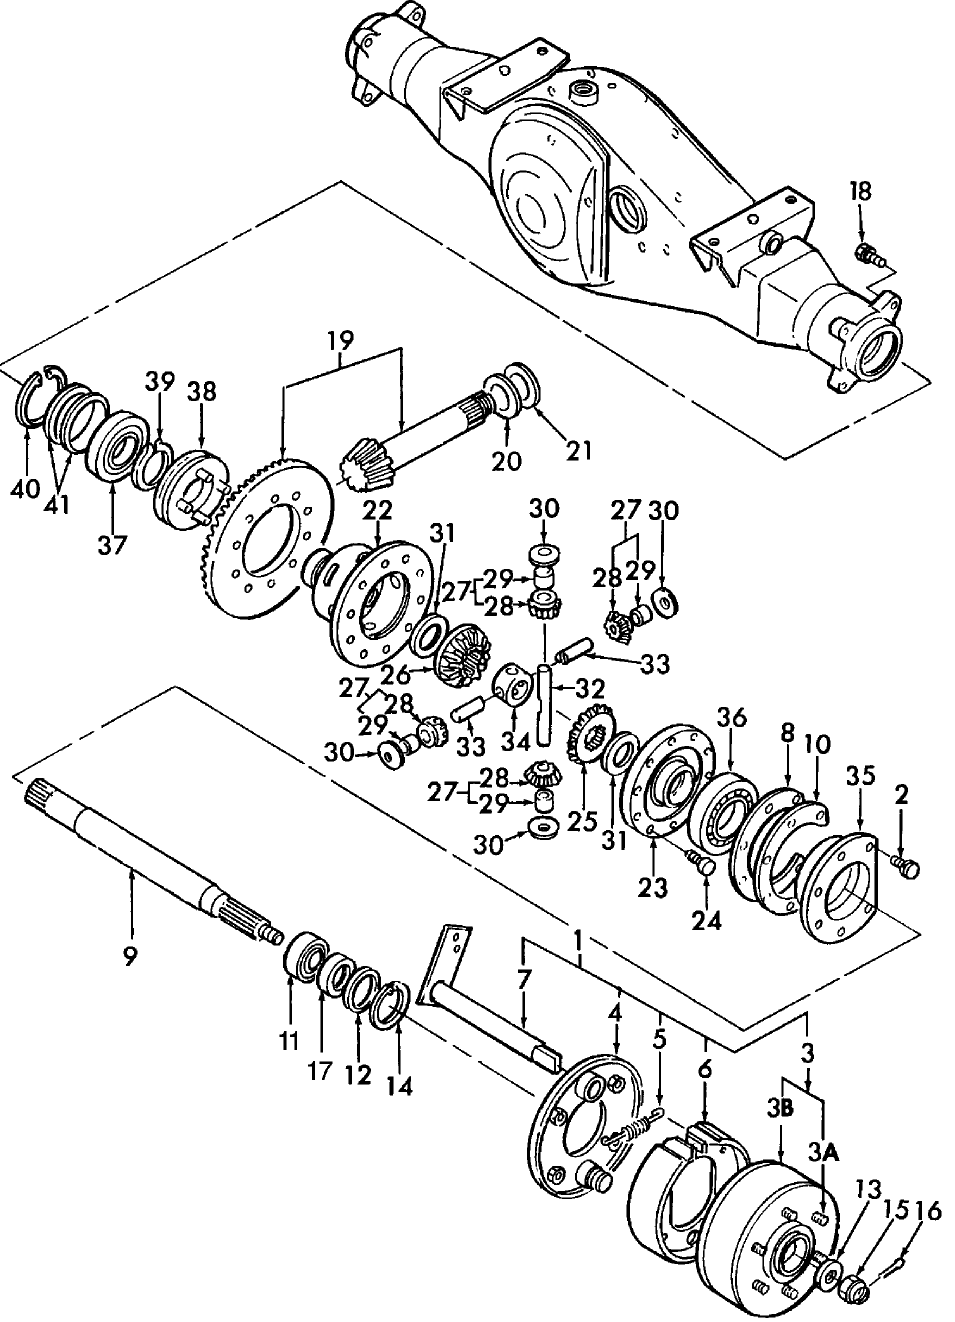 03B01 BRAKES & DIFFERENTIAL GEARS